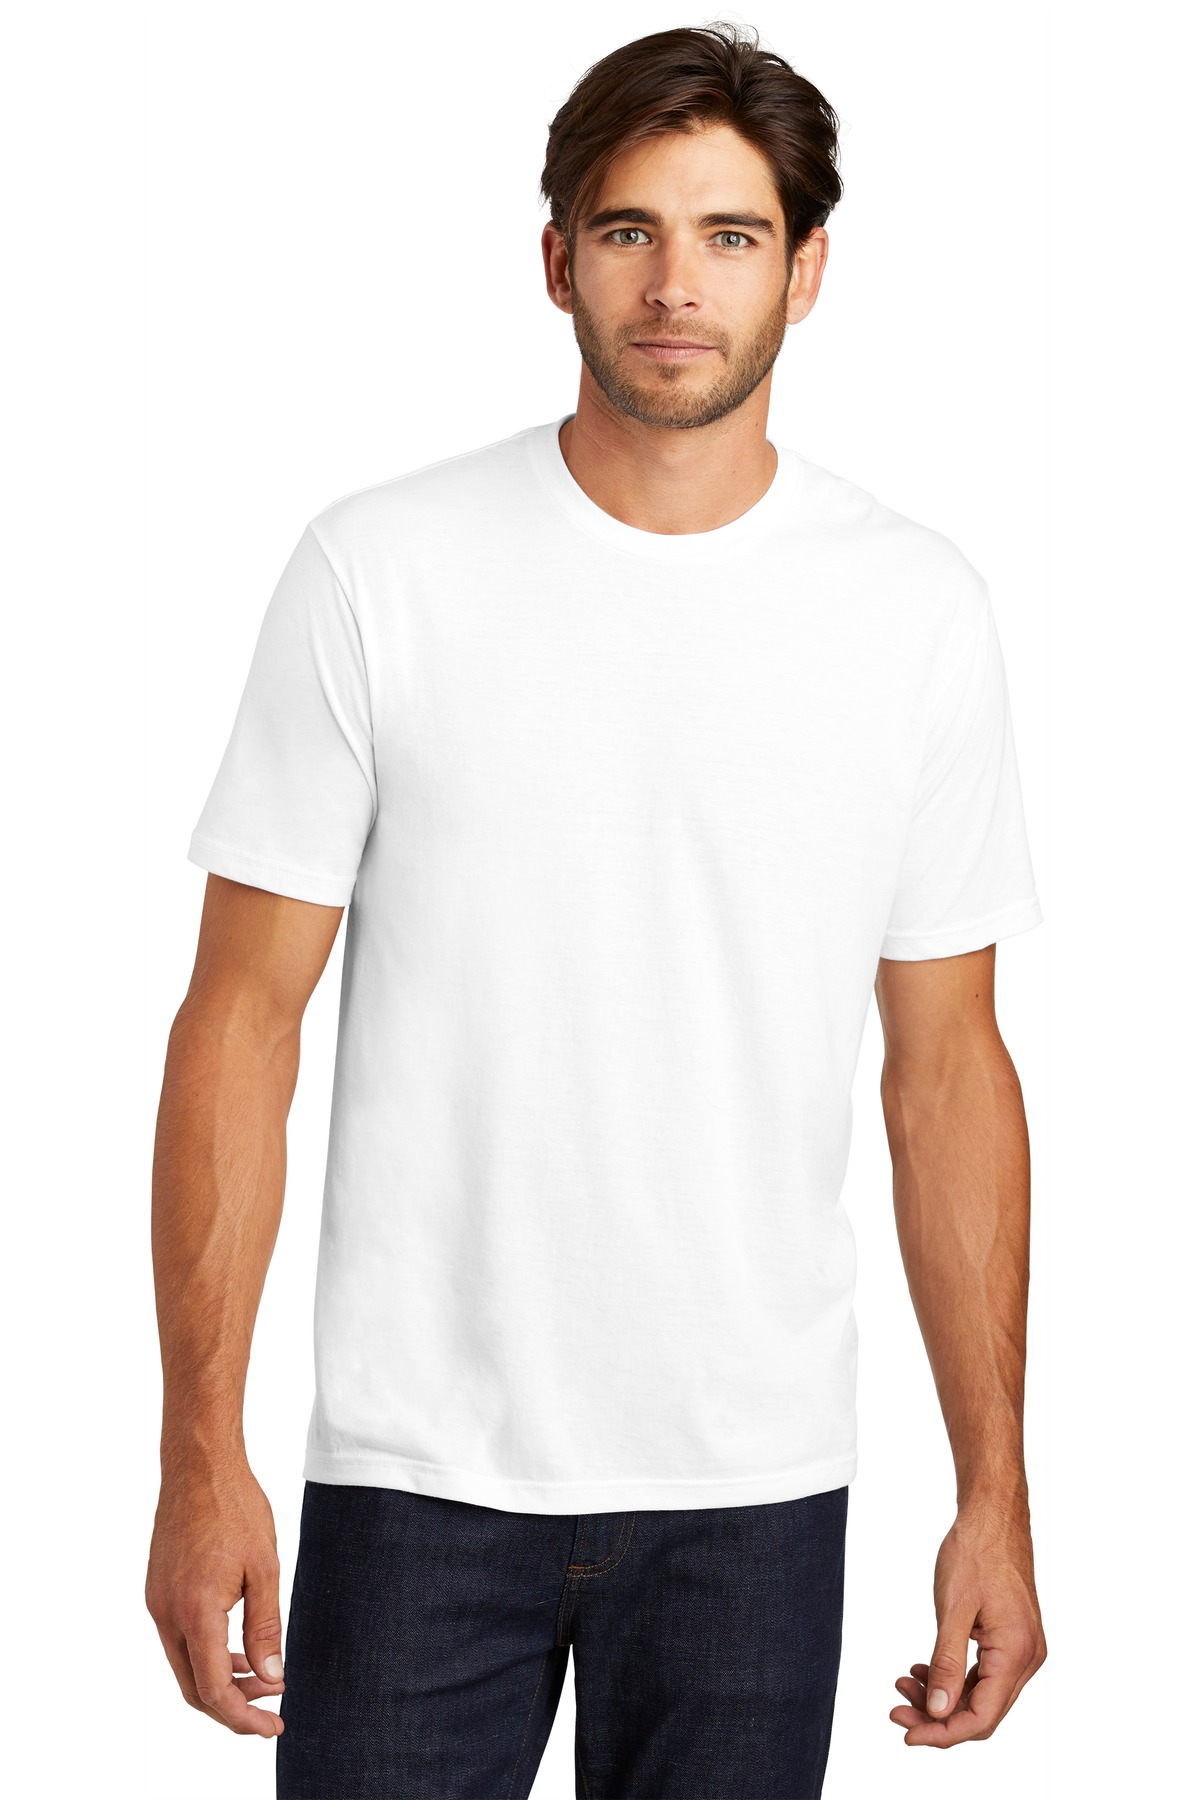 District Hospitality T-Shirts ® Perfect Tri®Tee.-District